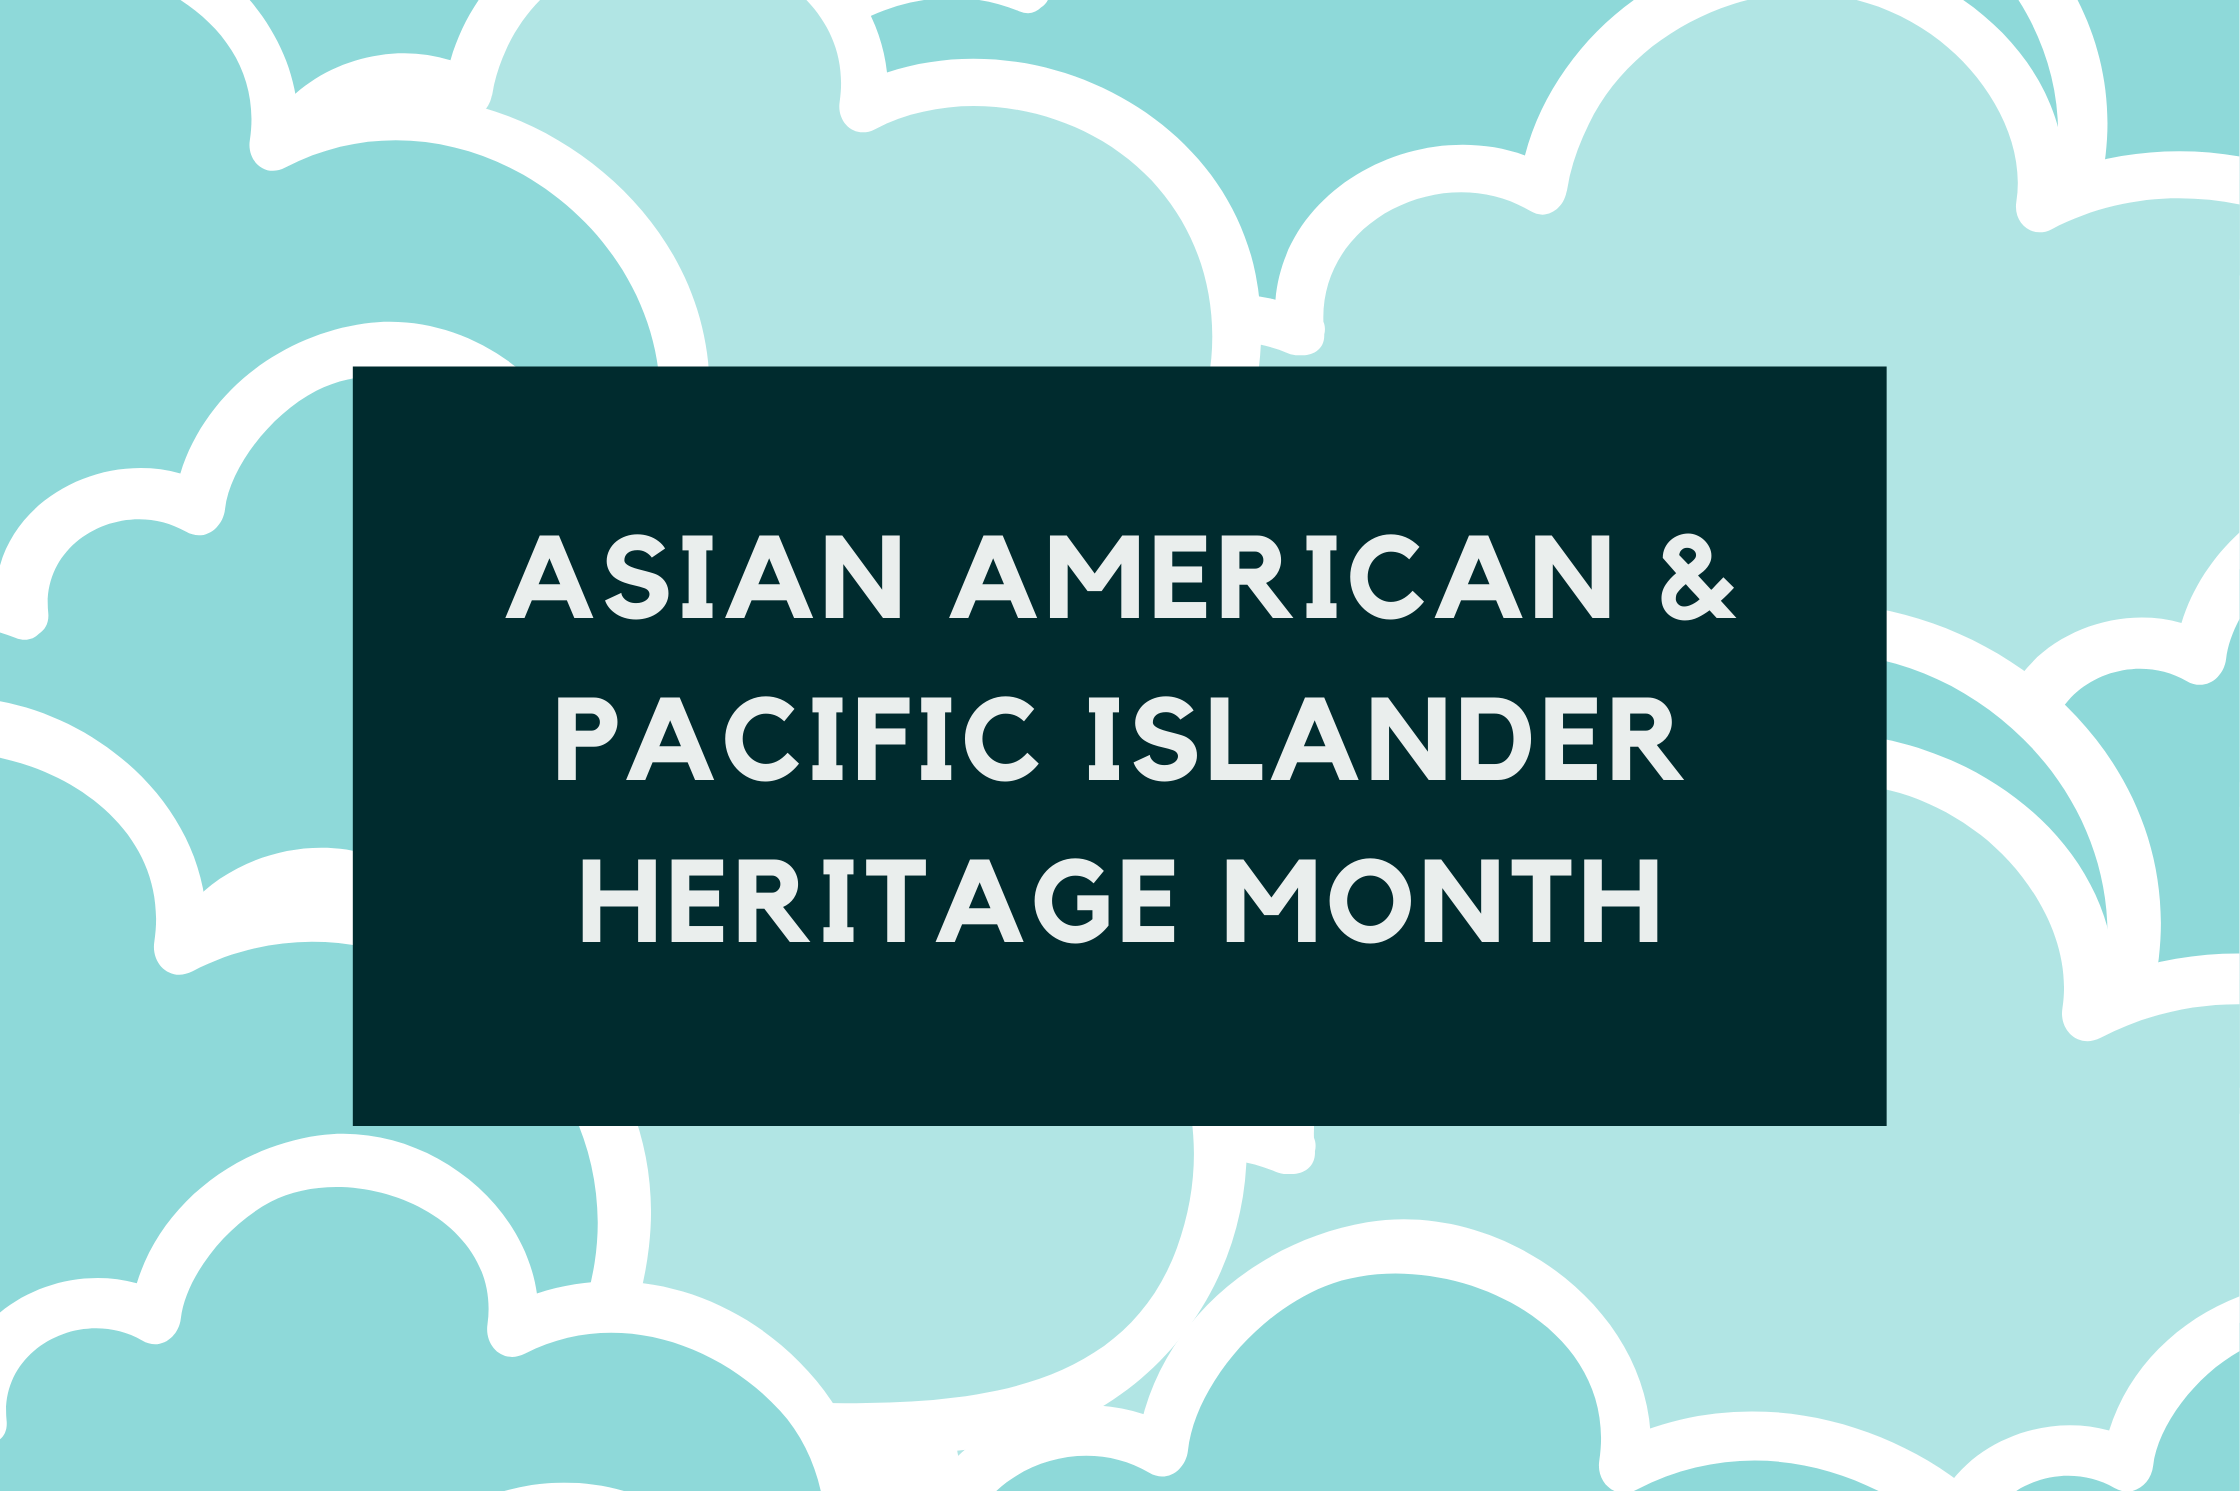 Asian/American and Pacific Islander Heritage Month - Mend Acupuncture